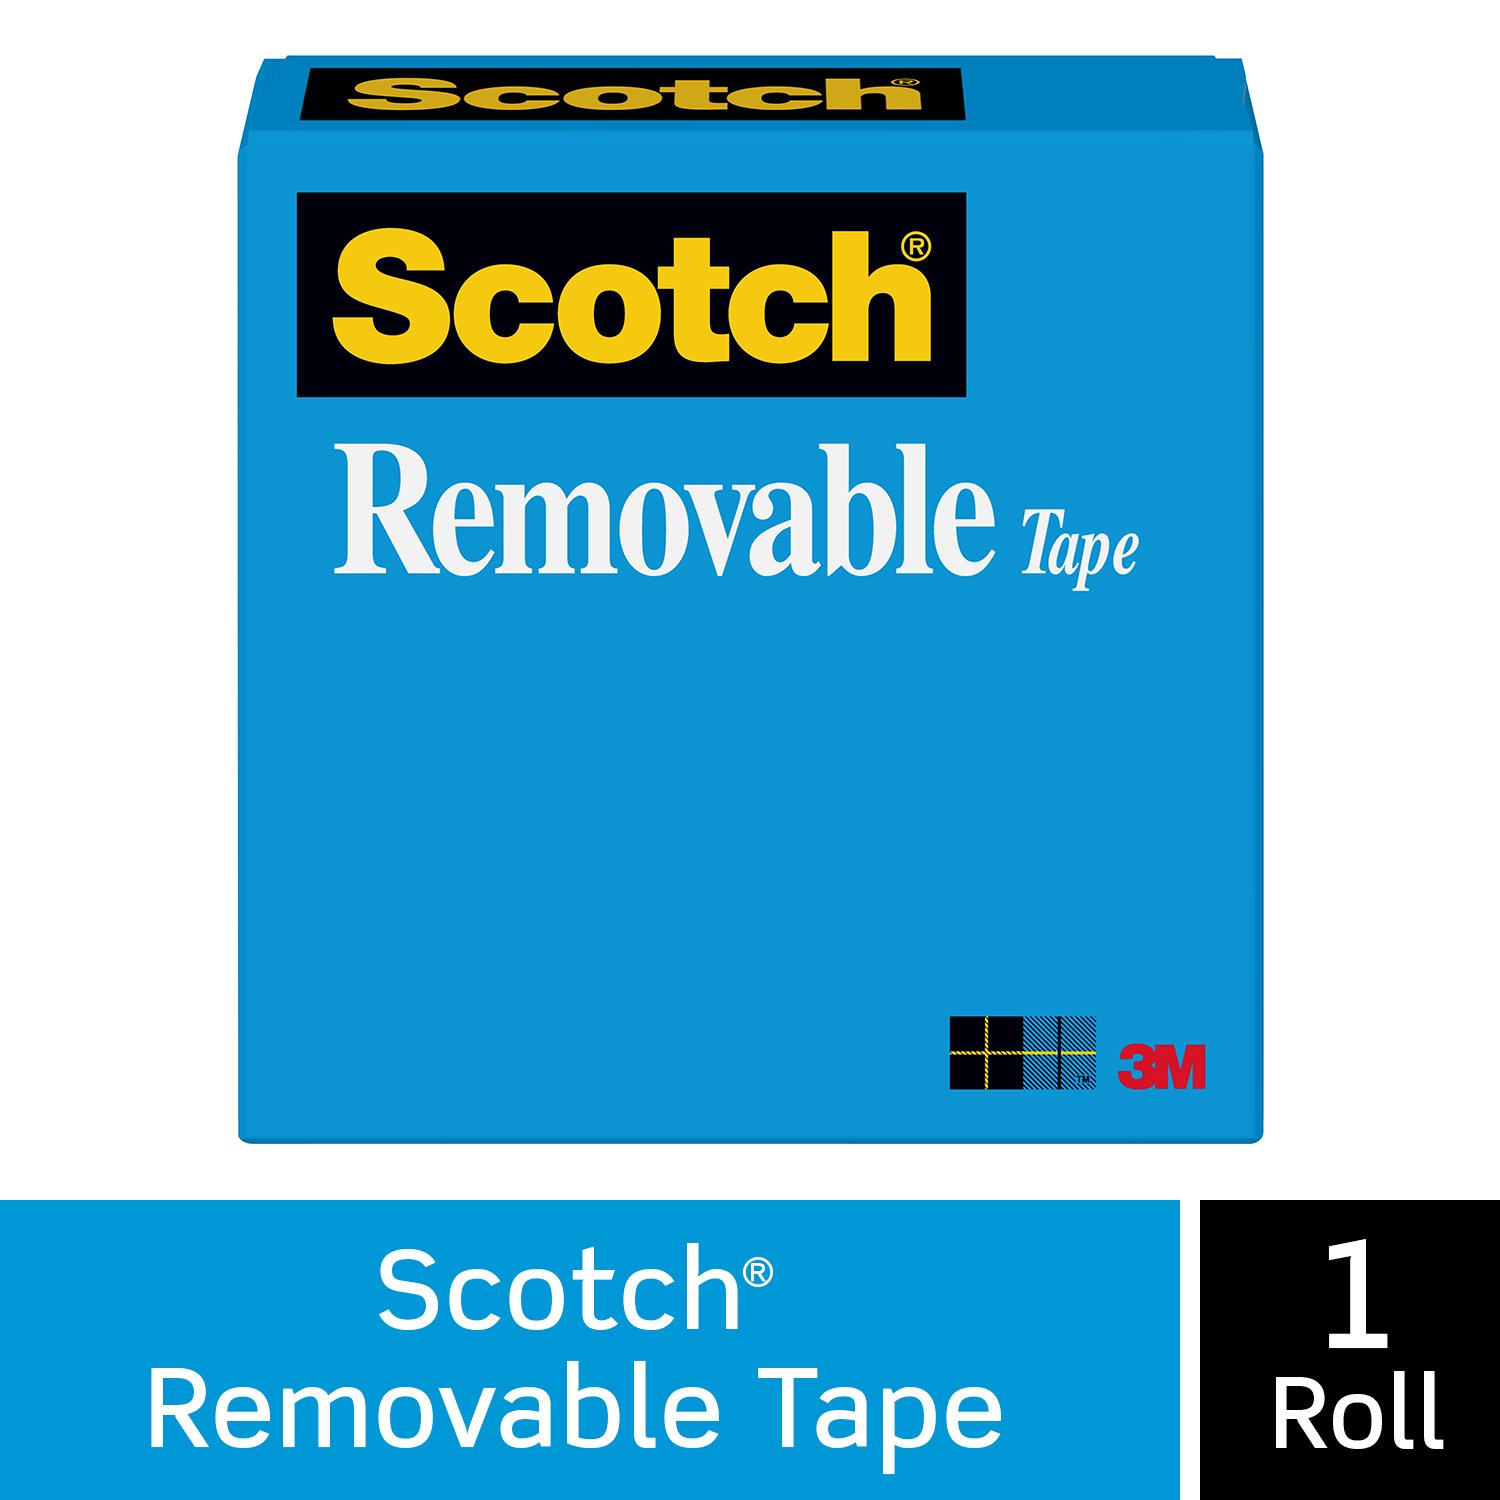 7010378976 - Scotch Removable Tape 811, 3/4 in x 2592 in Boxed